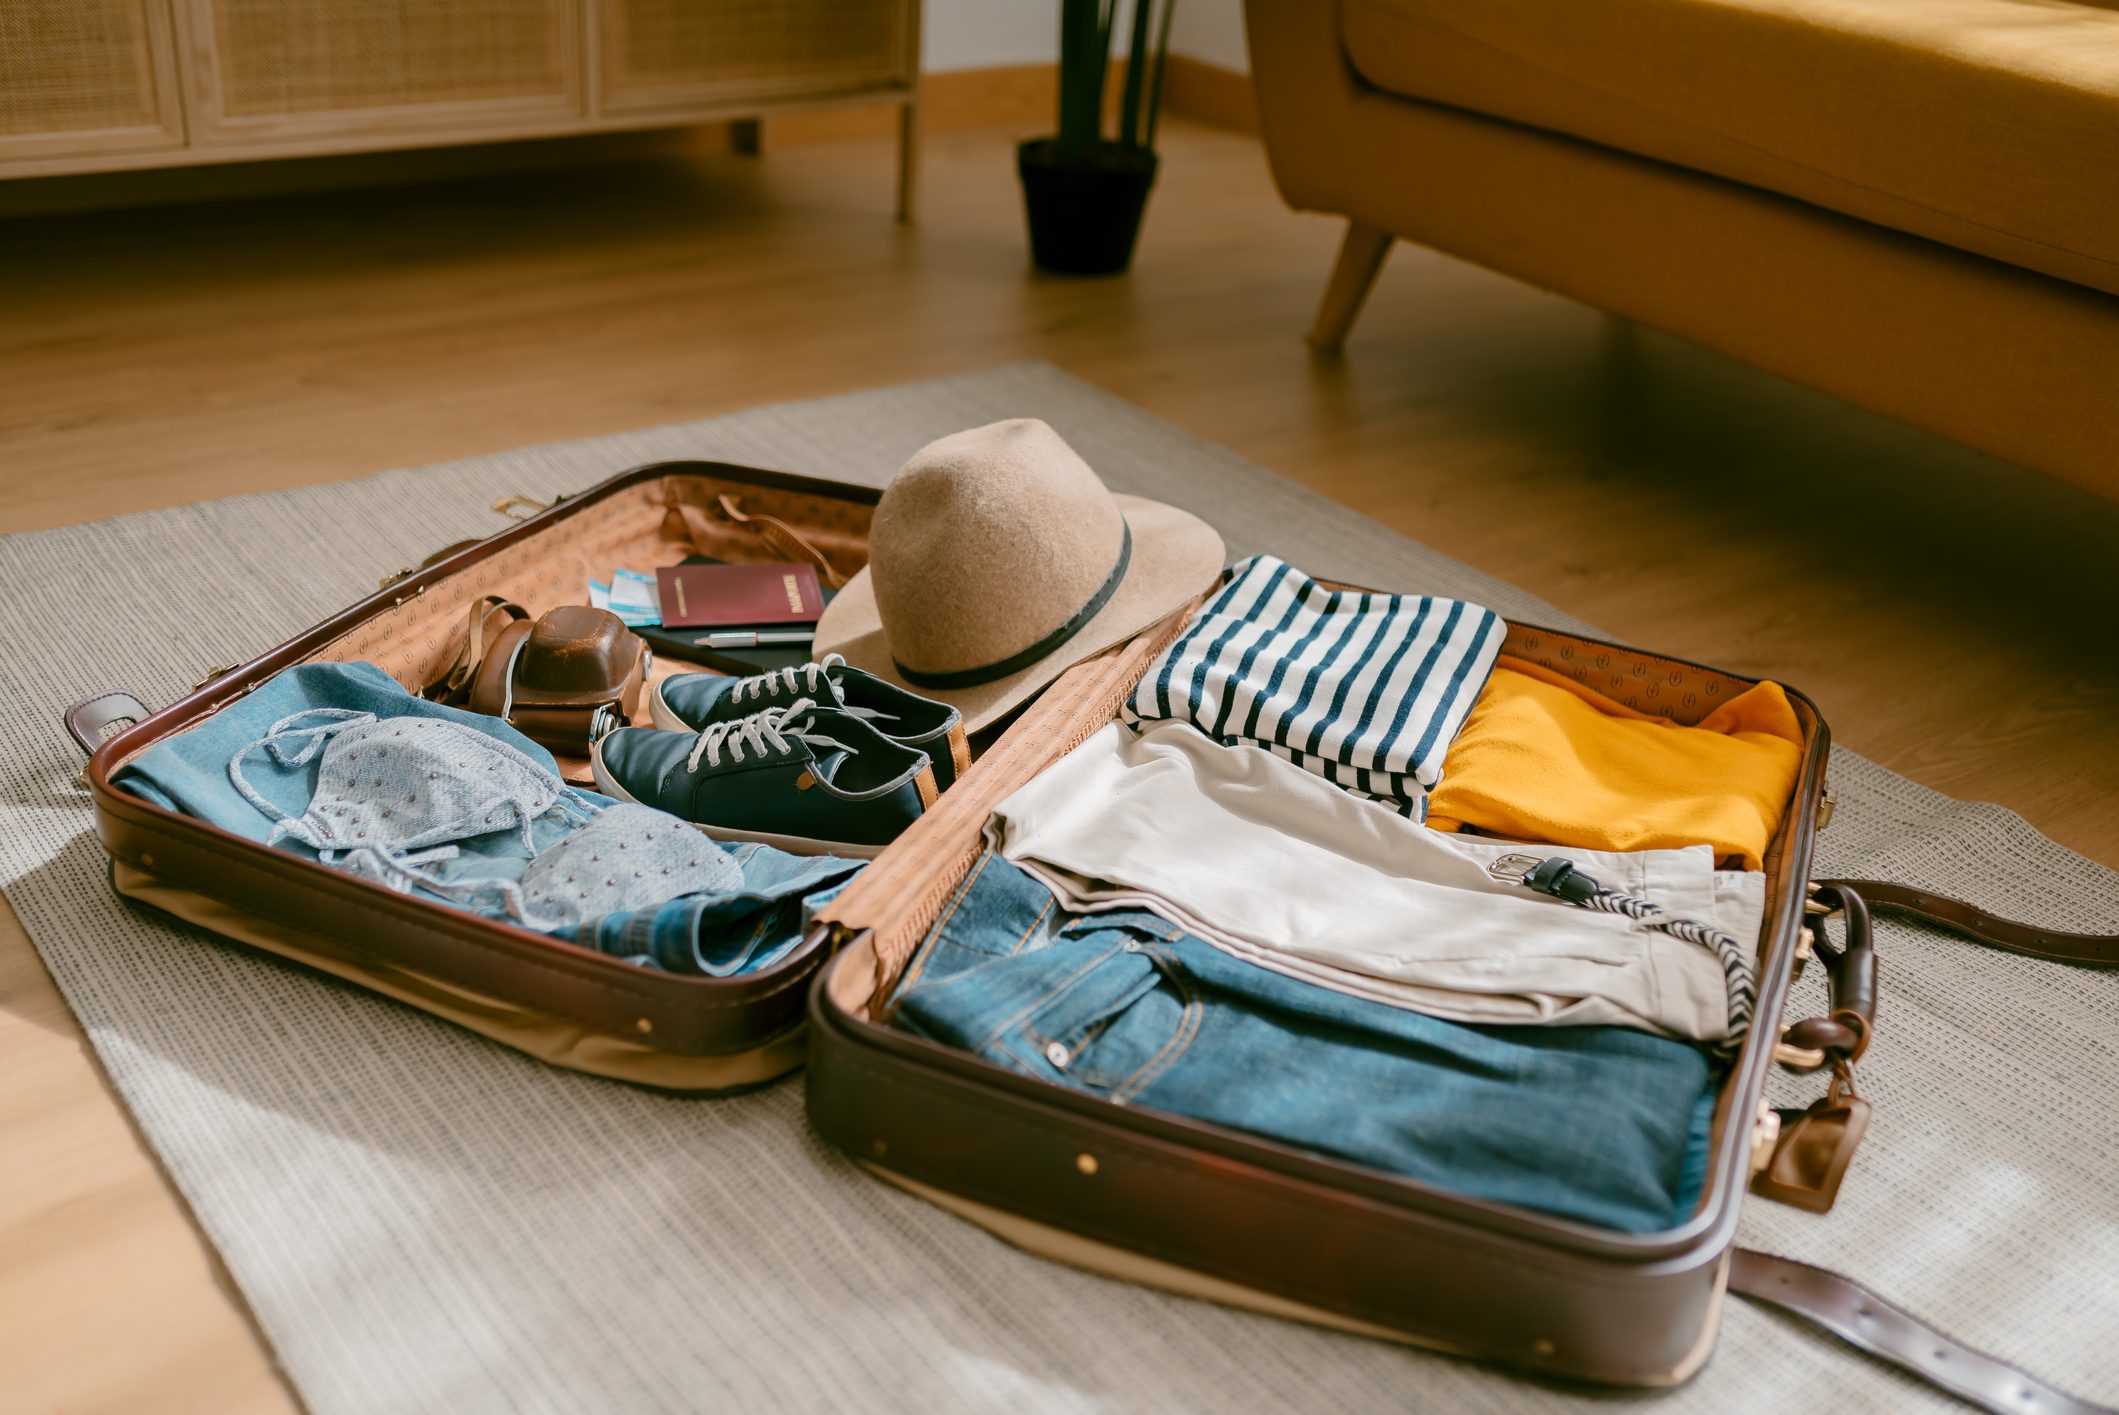 <p>Choosing a color palette for your travel wardrobe might sound like an unnecessary step, but it will make packing and getting dressed so much easier. Similar to creating a <a href="https://www.rd.com/article/capsule-wardrobe/" rel="noopener noreferrer">capsule wardrobe</a> (which includes a minimum number of wardrobe staples that coordinate for maximum efficiency), sticking to coordinating colors (and versatile <a href="https://www.vettacapsule.com/collections/the-minimal-capsule" rel="noopener noreferrer">capsule-approved items</a>) allows you to mix and match the pieces you bring, creating more outfits, saving space and limiting endless clothing decisions.</p> <p class="listicle-page__cta-button-shop"><a class="shop-btn" href="https://www.vettacapsule.com/collections/the-minimal-capsule">Shop the Capsule Wardrobe</a></p>